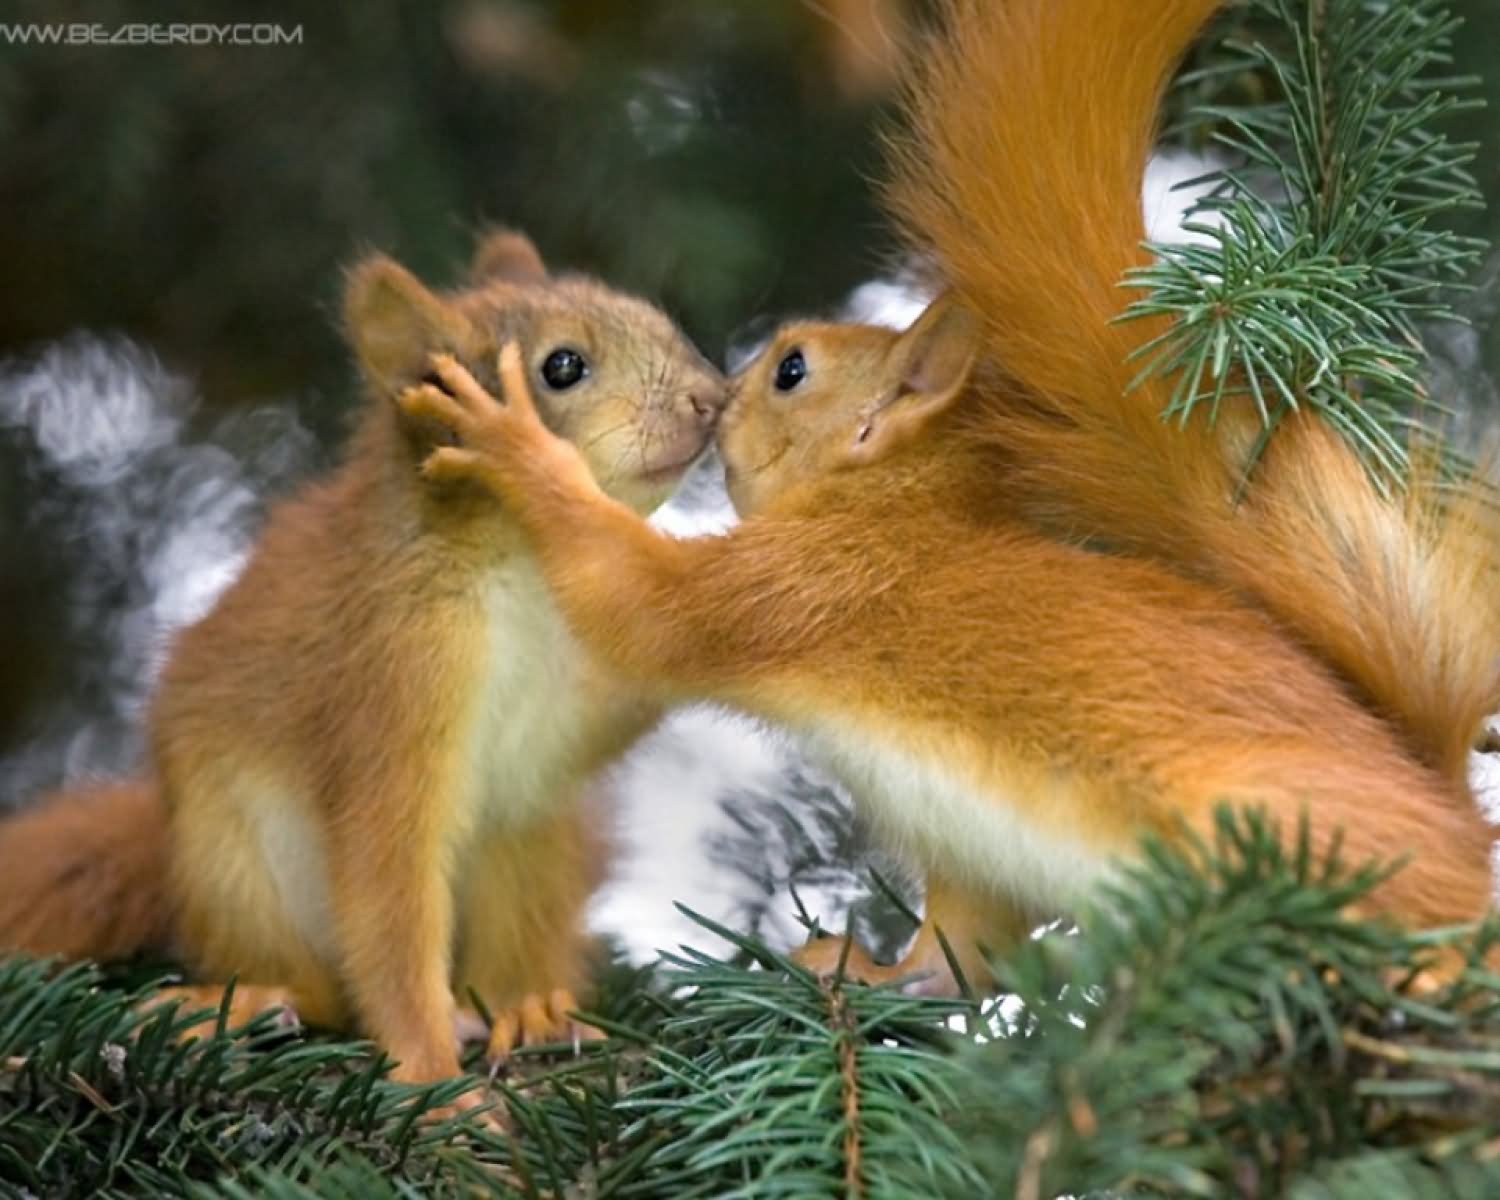 Funny Couple Chipmunk Kissing Image